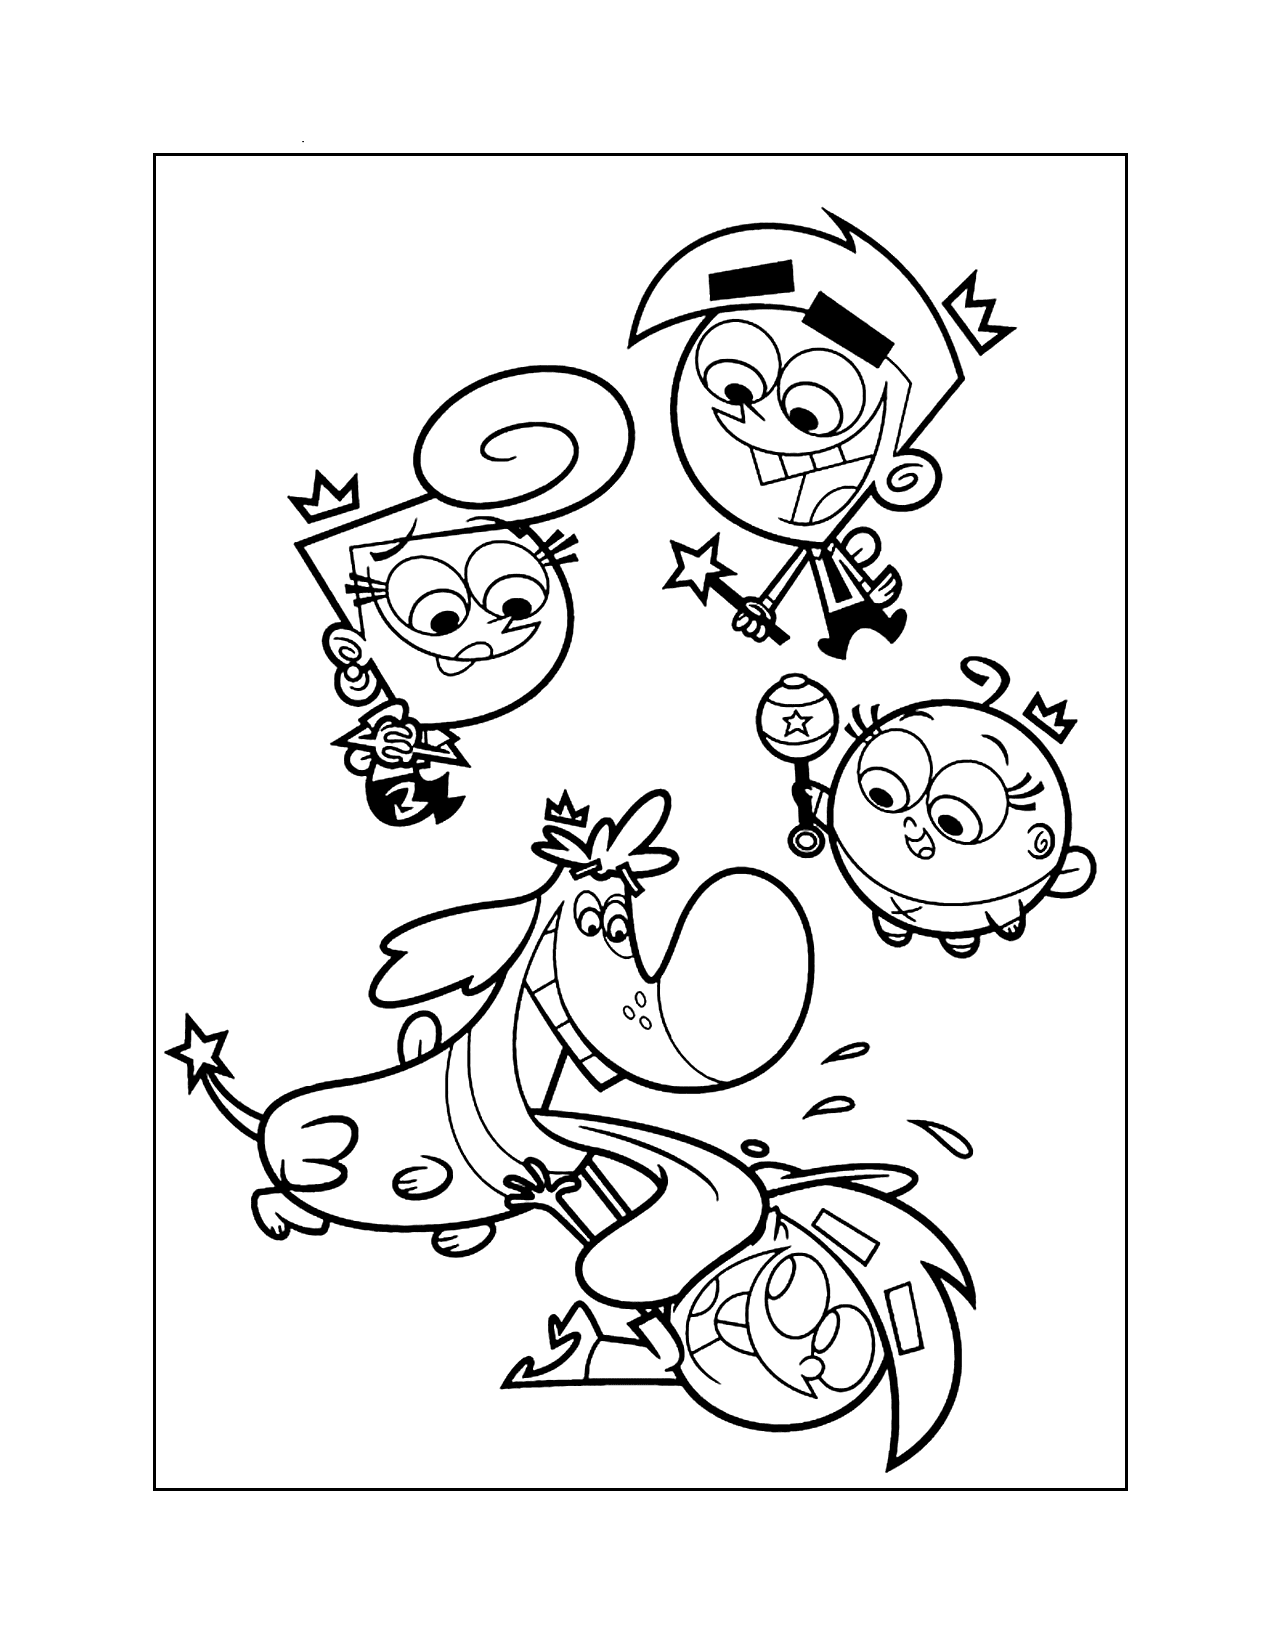 Fun Fairly Odd Parents Coloring Pages